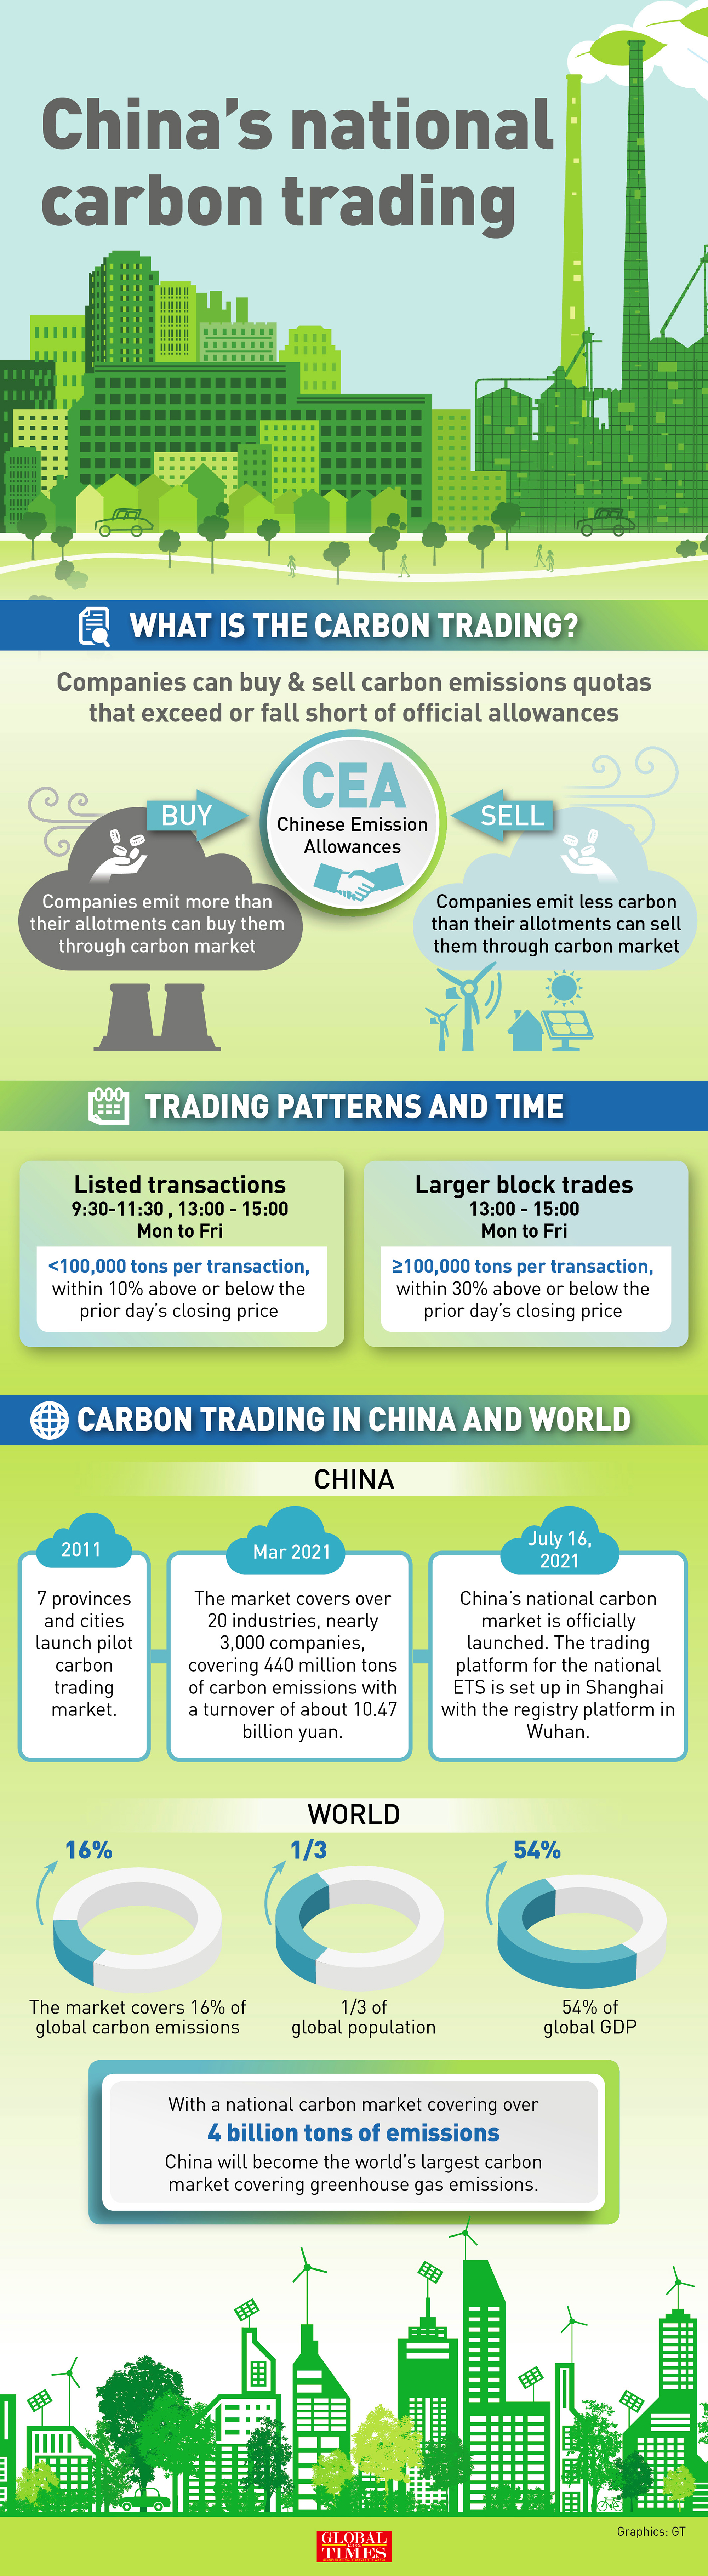 China's national carbon trading